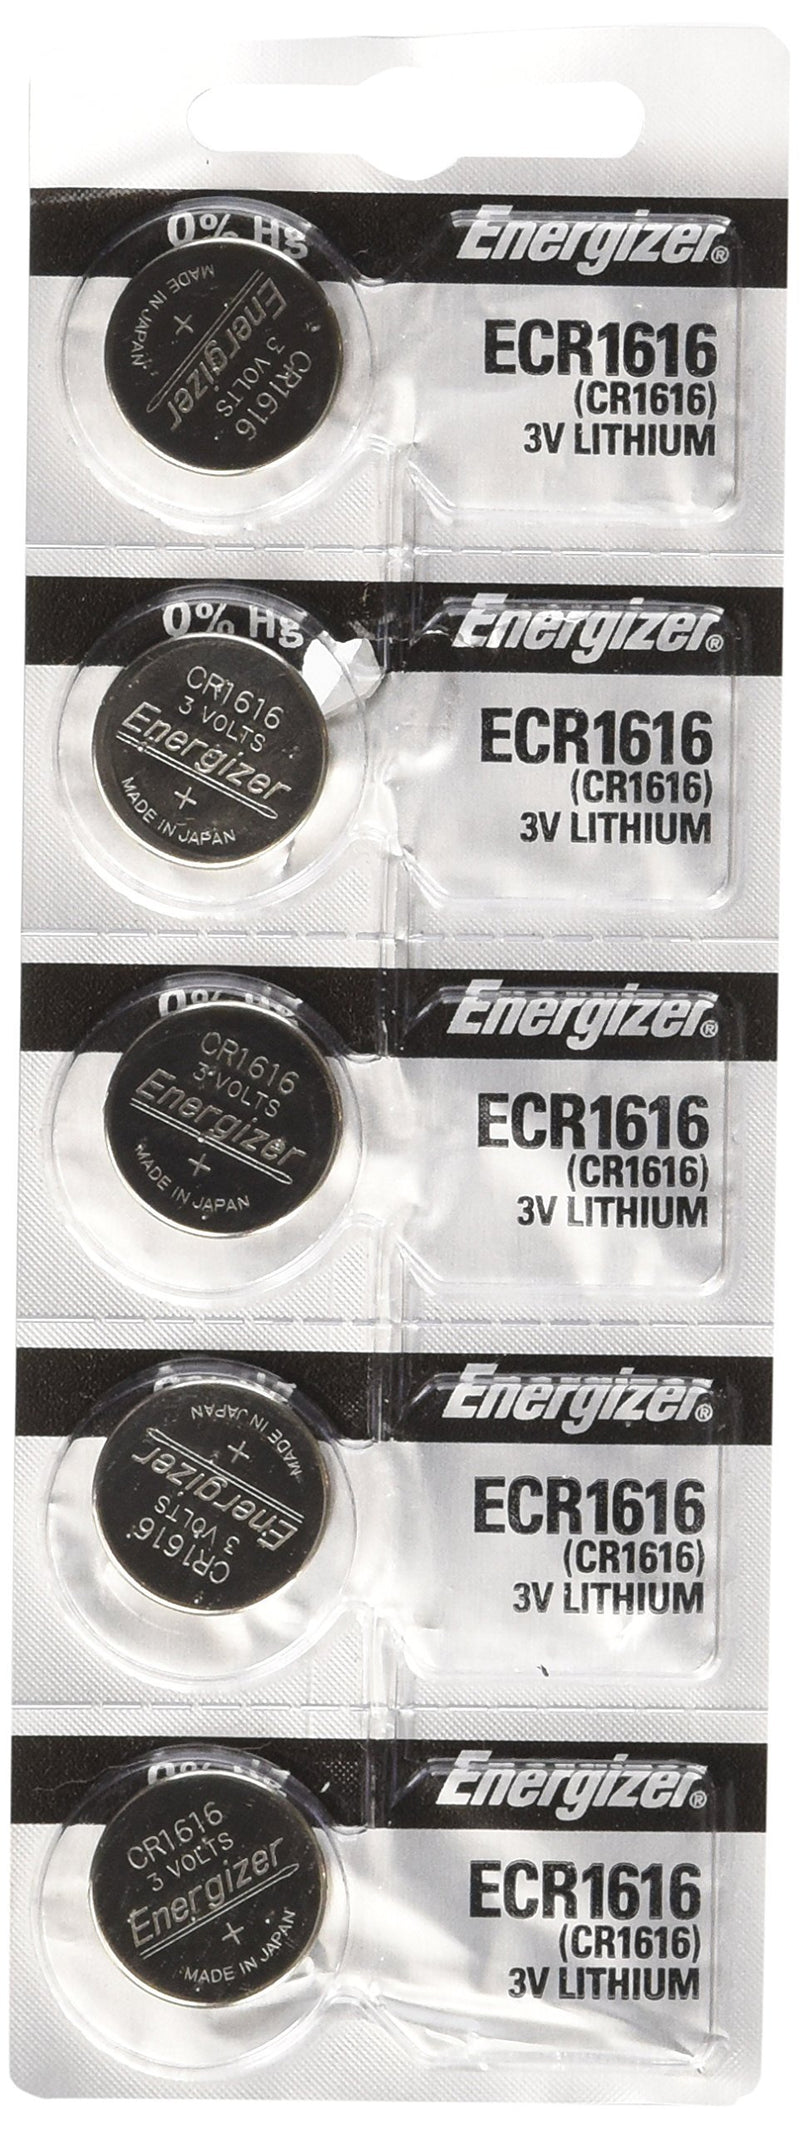 Energizer CR1616 3V Lithium Battery -Pack of 5 5 Count (Pack of 1)